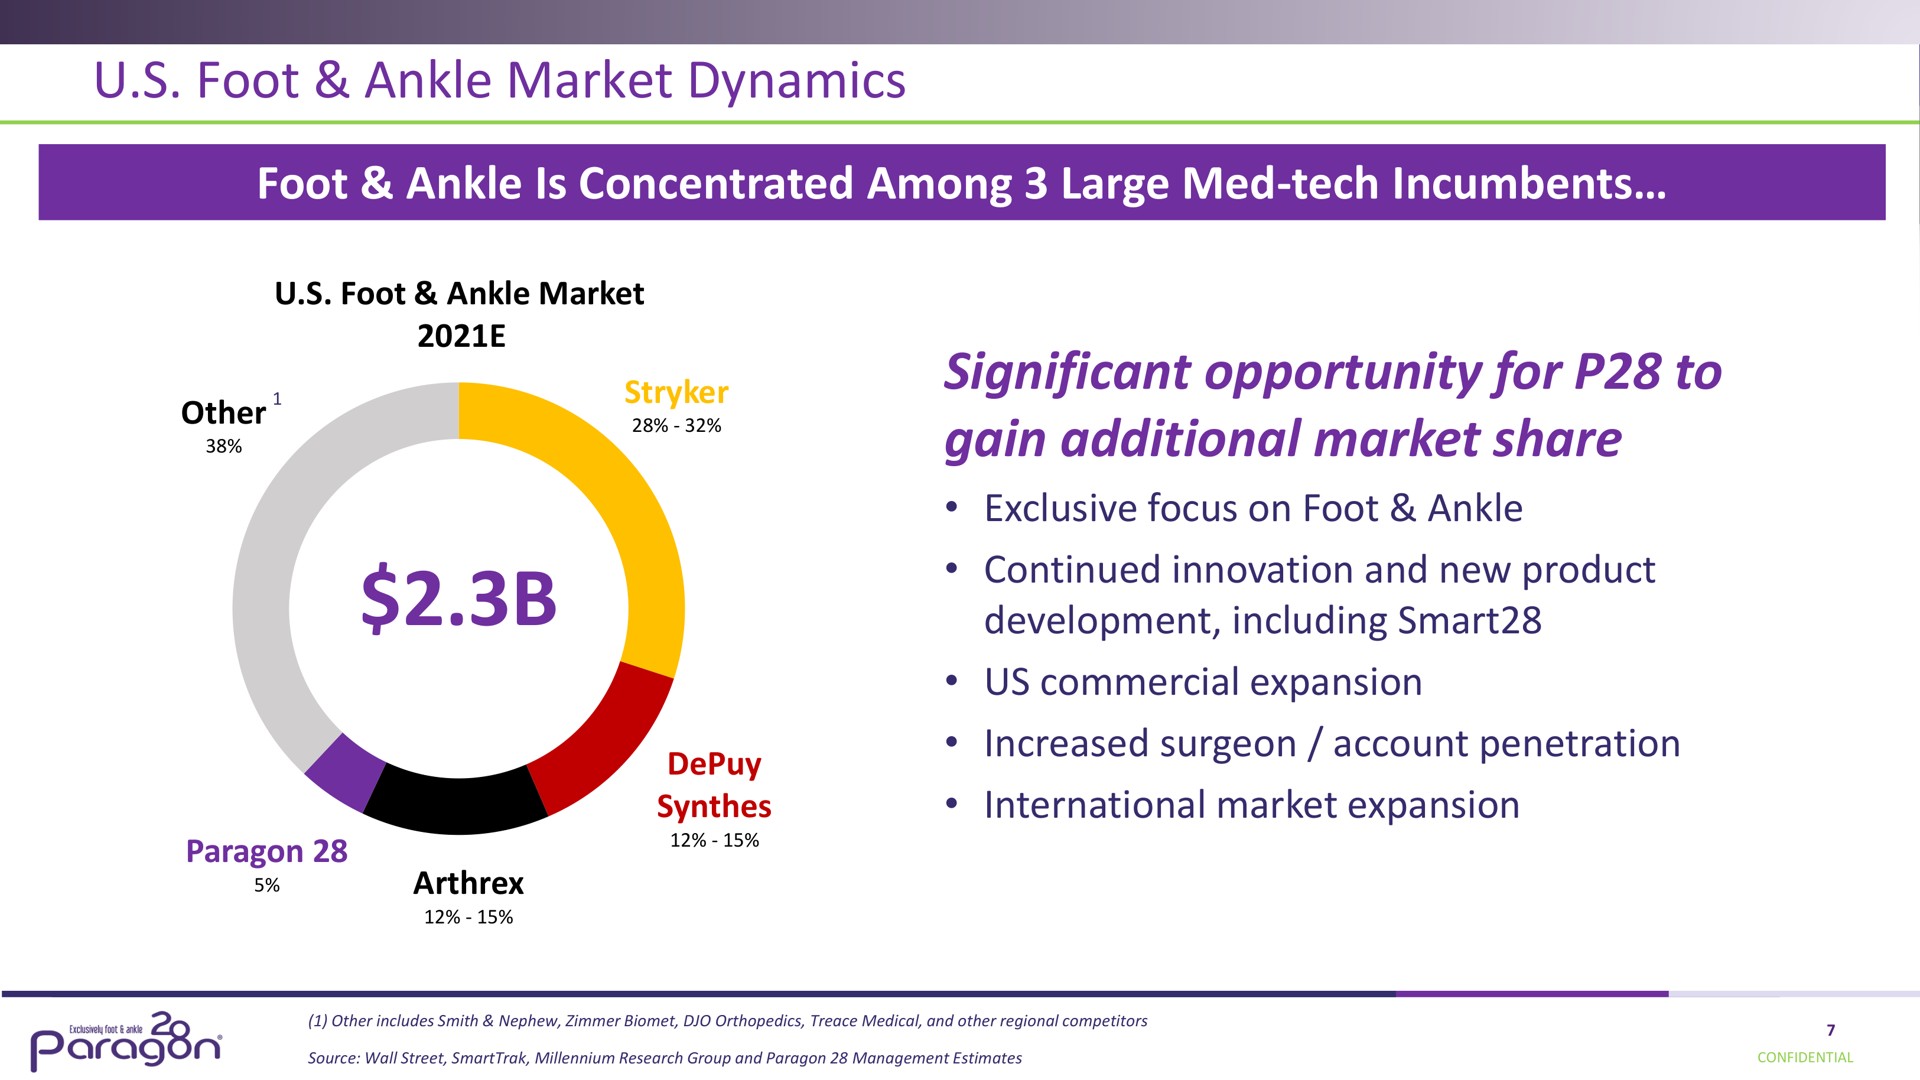 foot ankle market dynamics foot ankle is concentrated among large tech incumbents significant opportunity for to gain additional market share | Paragon28